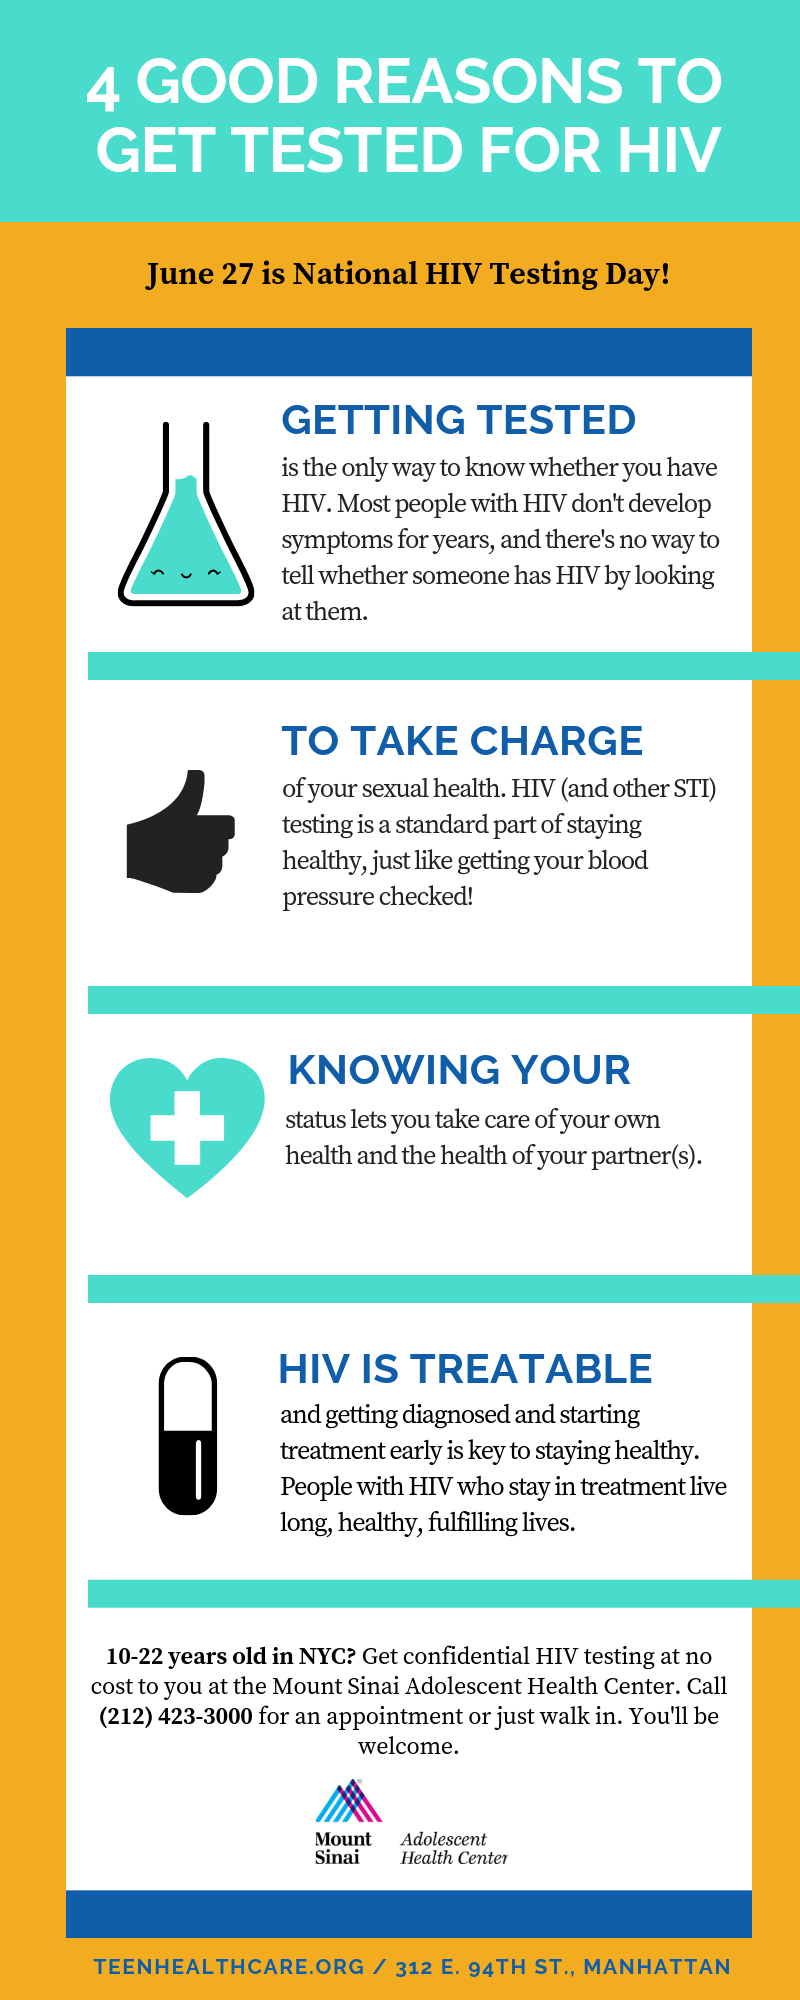 4 good reasons to get tested for HIV. 1. Getting tested is the only way to know whether you have HIV. Most people with HIV don't develop symptoms for years, and there's no way to tell whether someone has HIV by looking at them. 2. To take charge of your sexual health. HIV (and other STI) testing is a standard part of staying healthy, just like getting your blood pressure checked! 3. Knowing your status lets you take care of your own health and the health of your partner(s). 4. HIV is treatable and getting diagnosed and starting treatment early is key to staying healthy. People with HIV who stay in treatment live long, healthy, fulfilling lives.